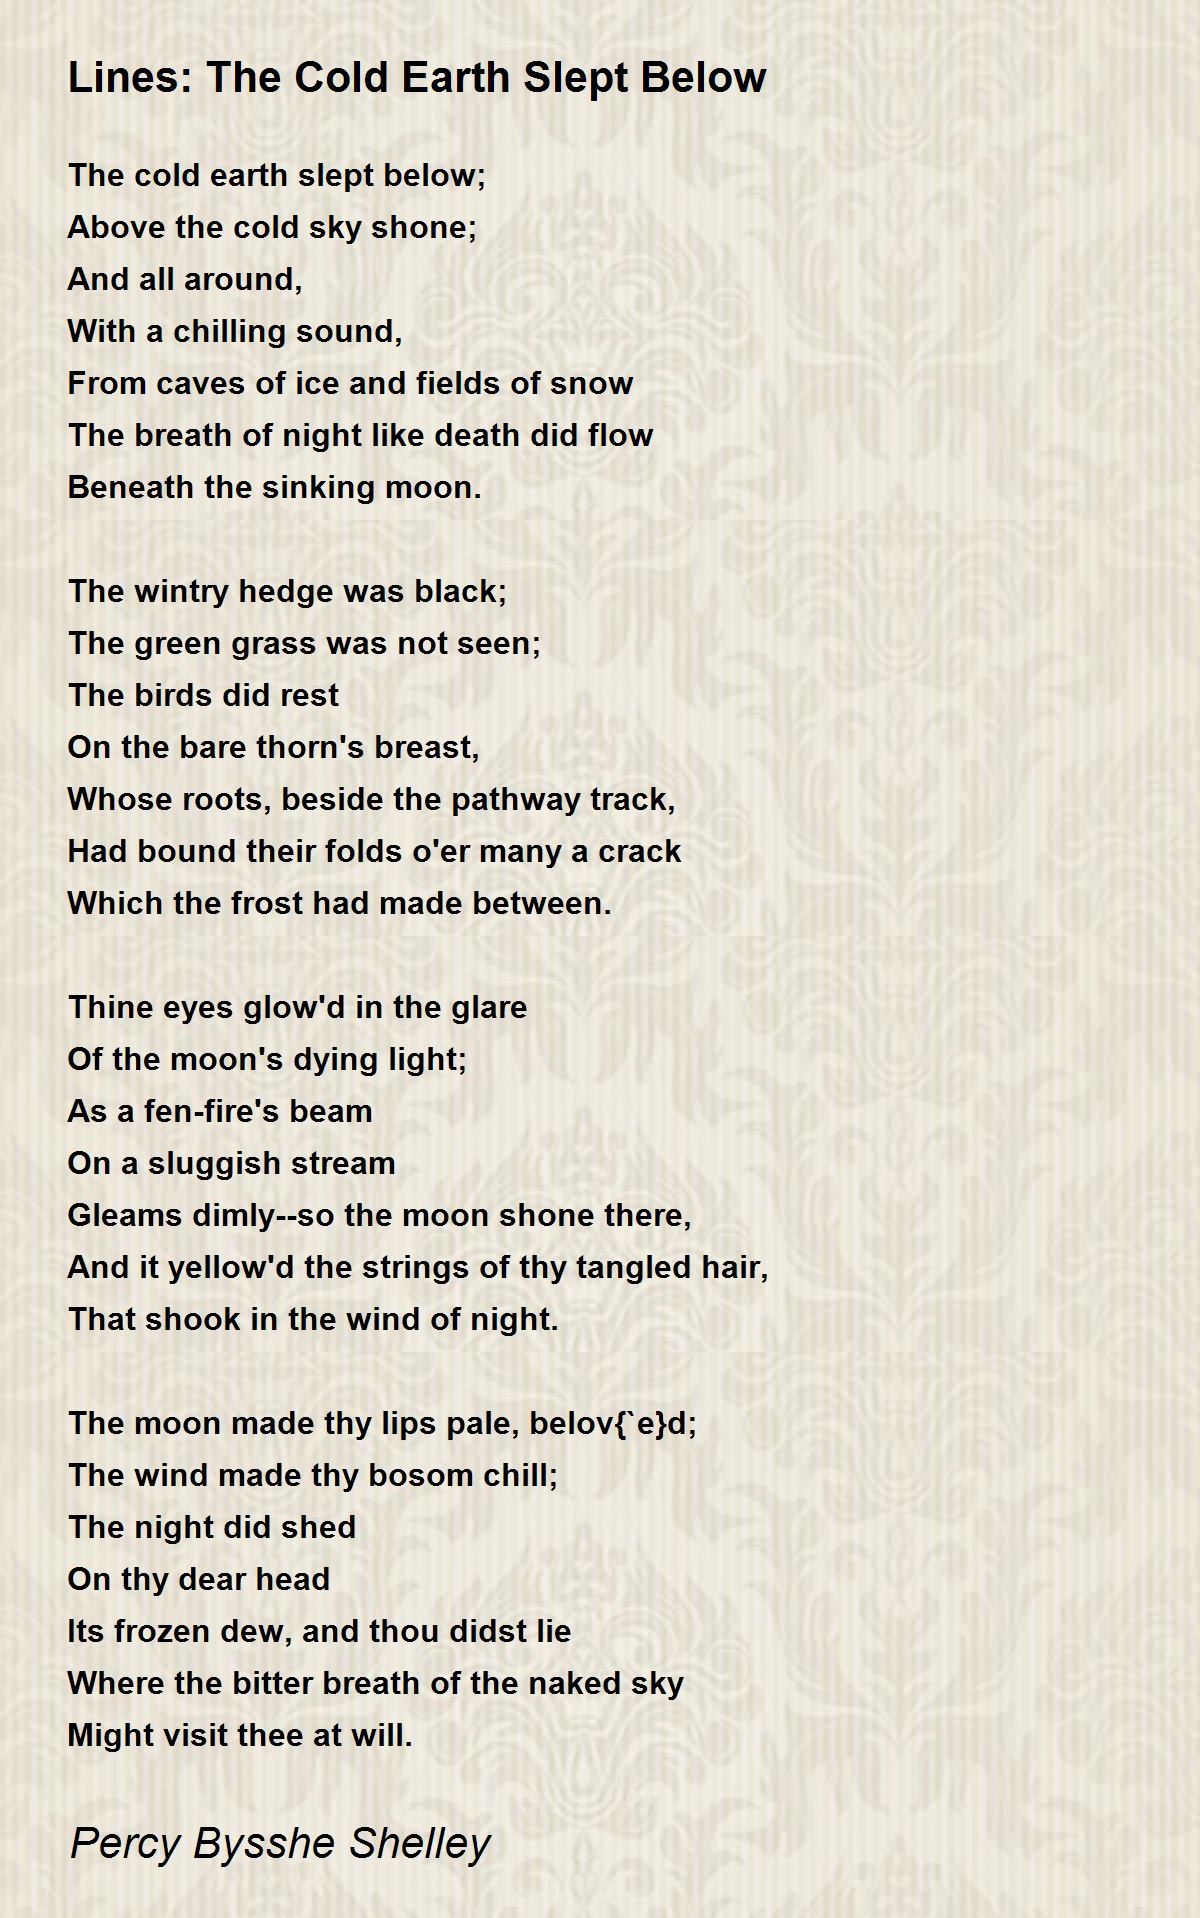 Lines: The Cold Earth Slept Below Poem by Percy Bysshe Shelley - Poem